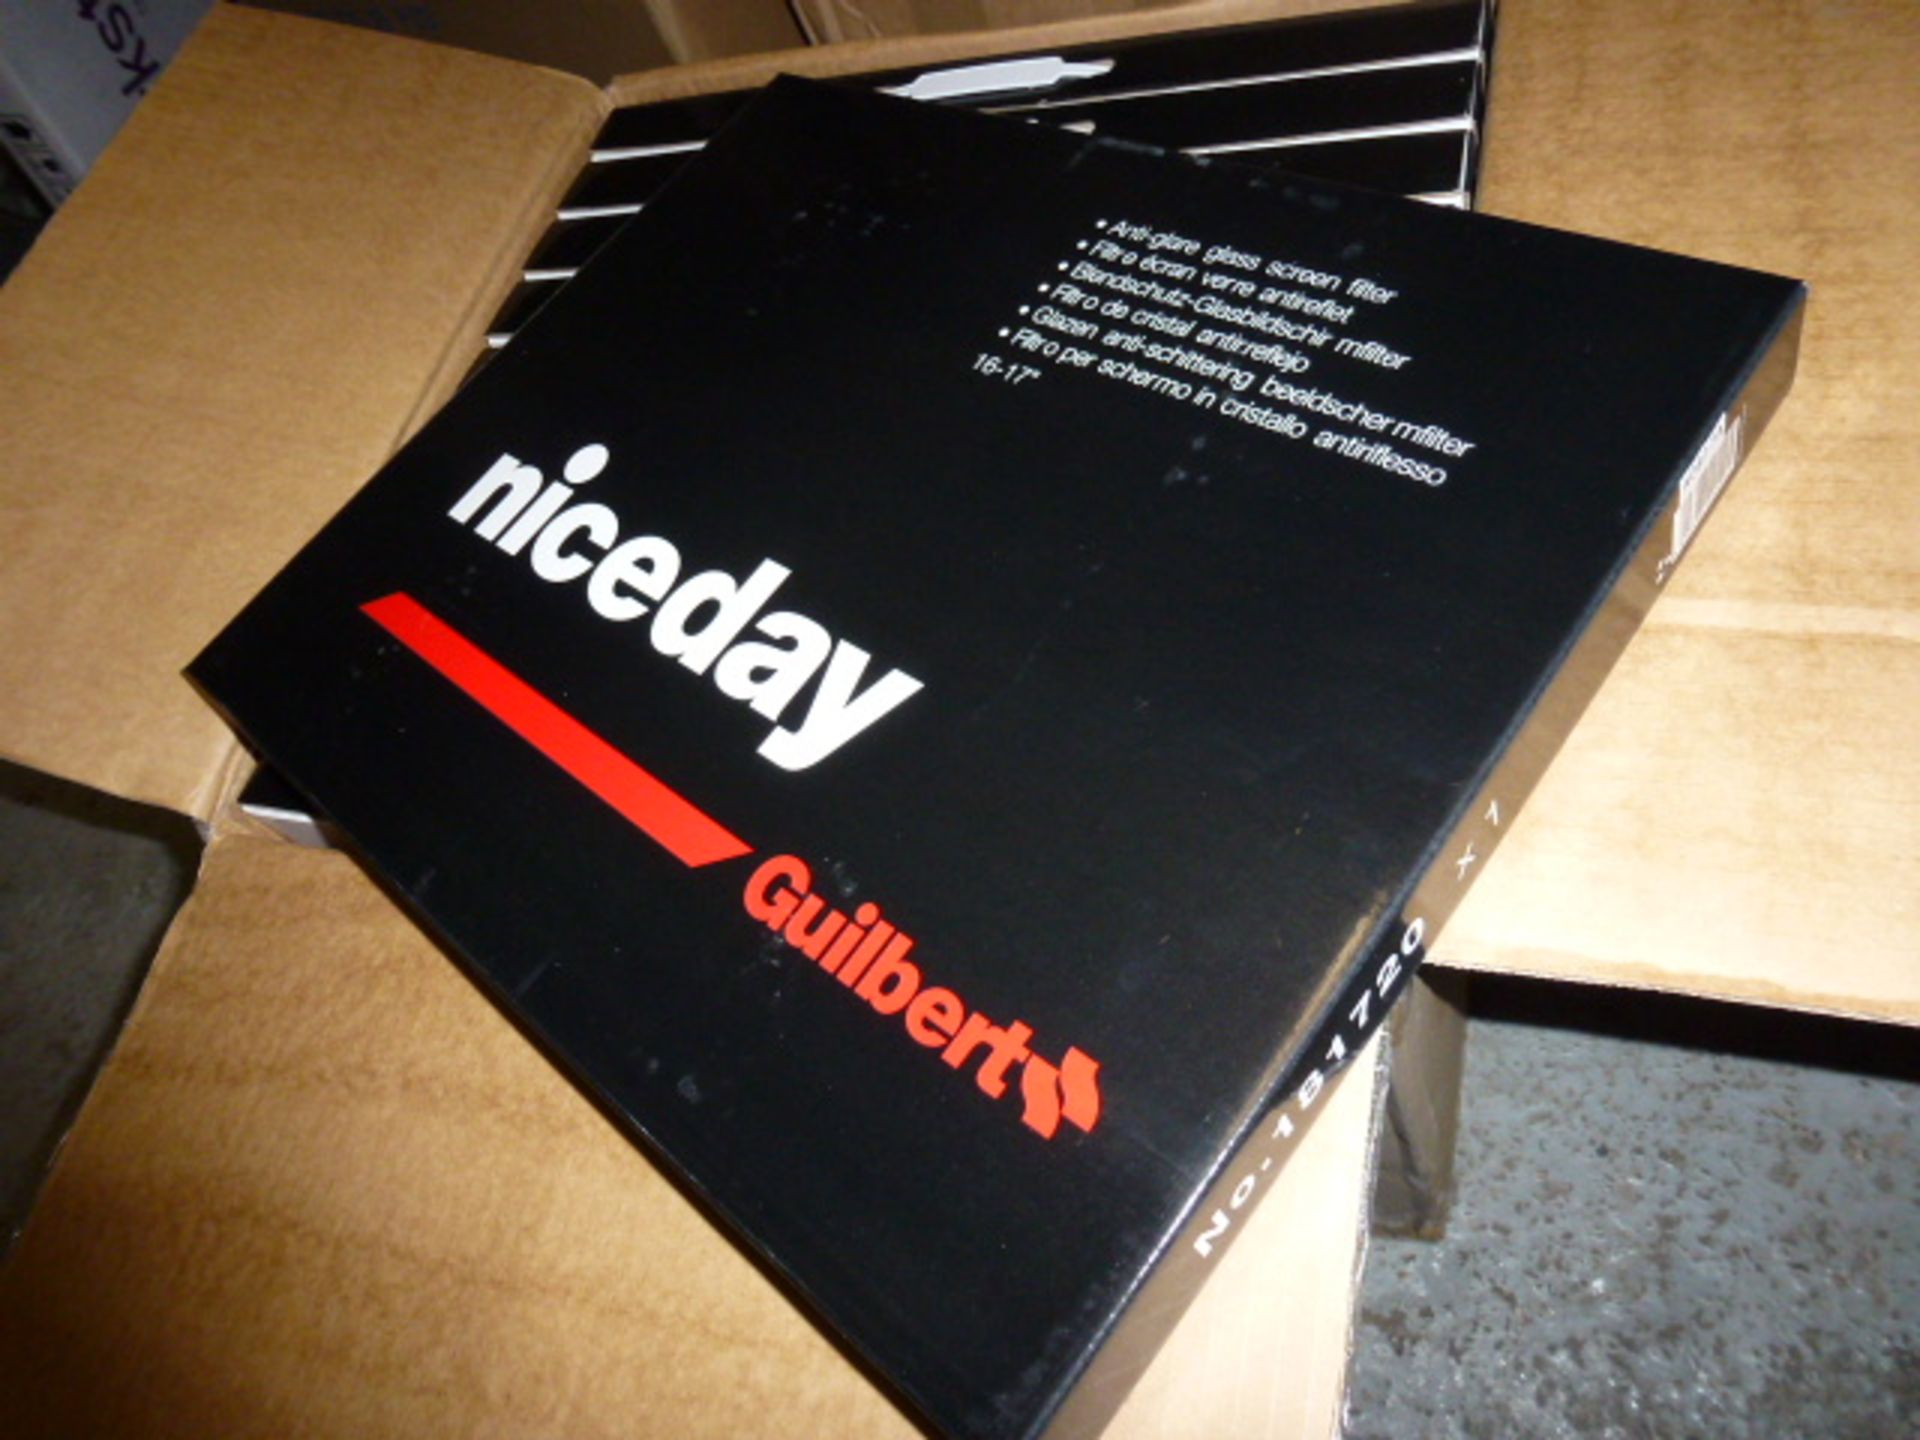 10 x Guilbert Niceday ANTI-GLARE SCREEN FILTERS For 16-17 Inch PC Monitors - Suitable For TFT or CRT - Image 7 of 7